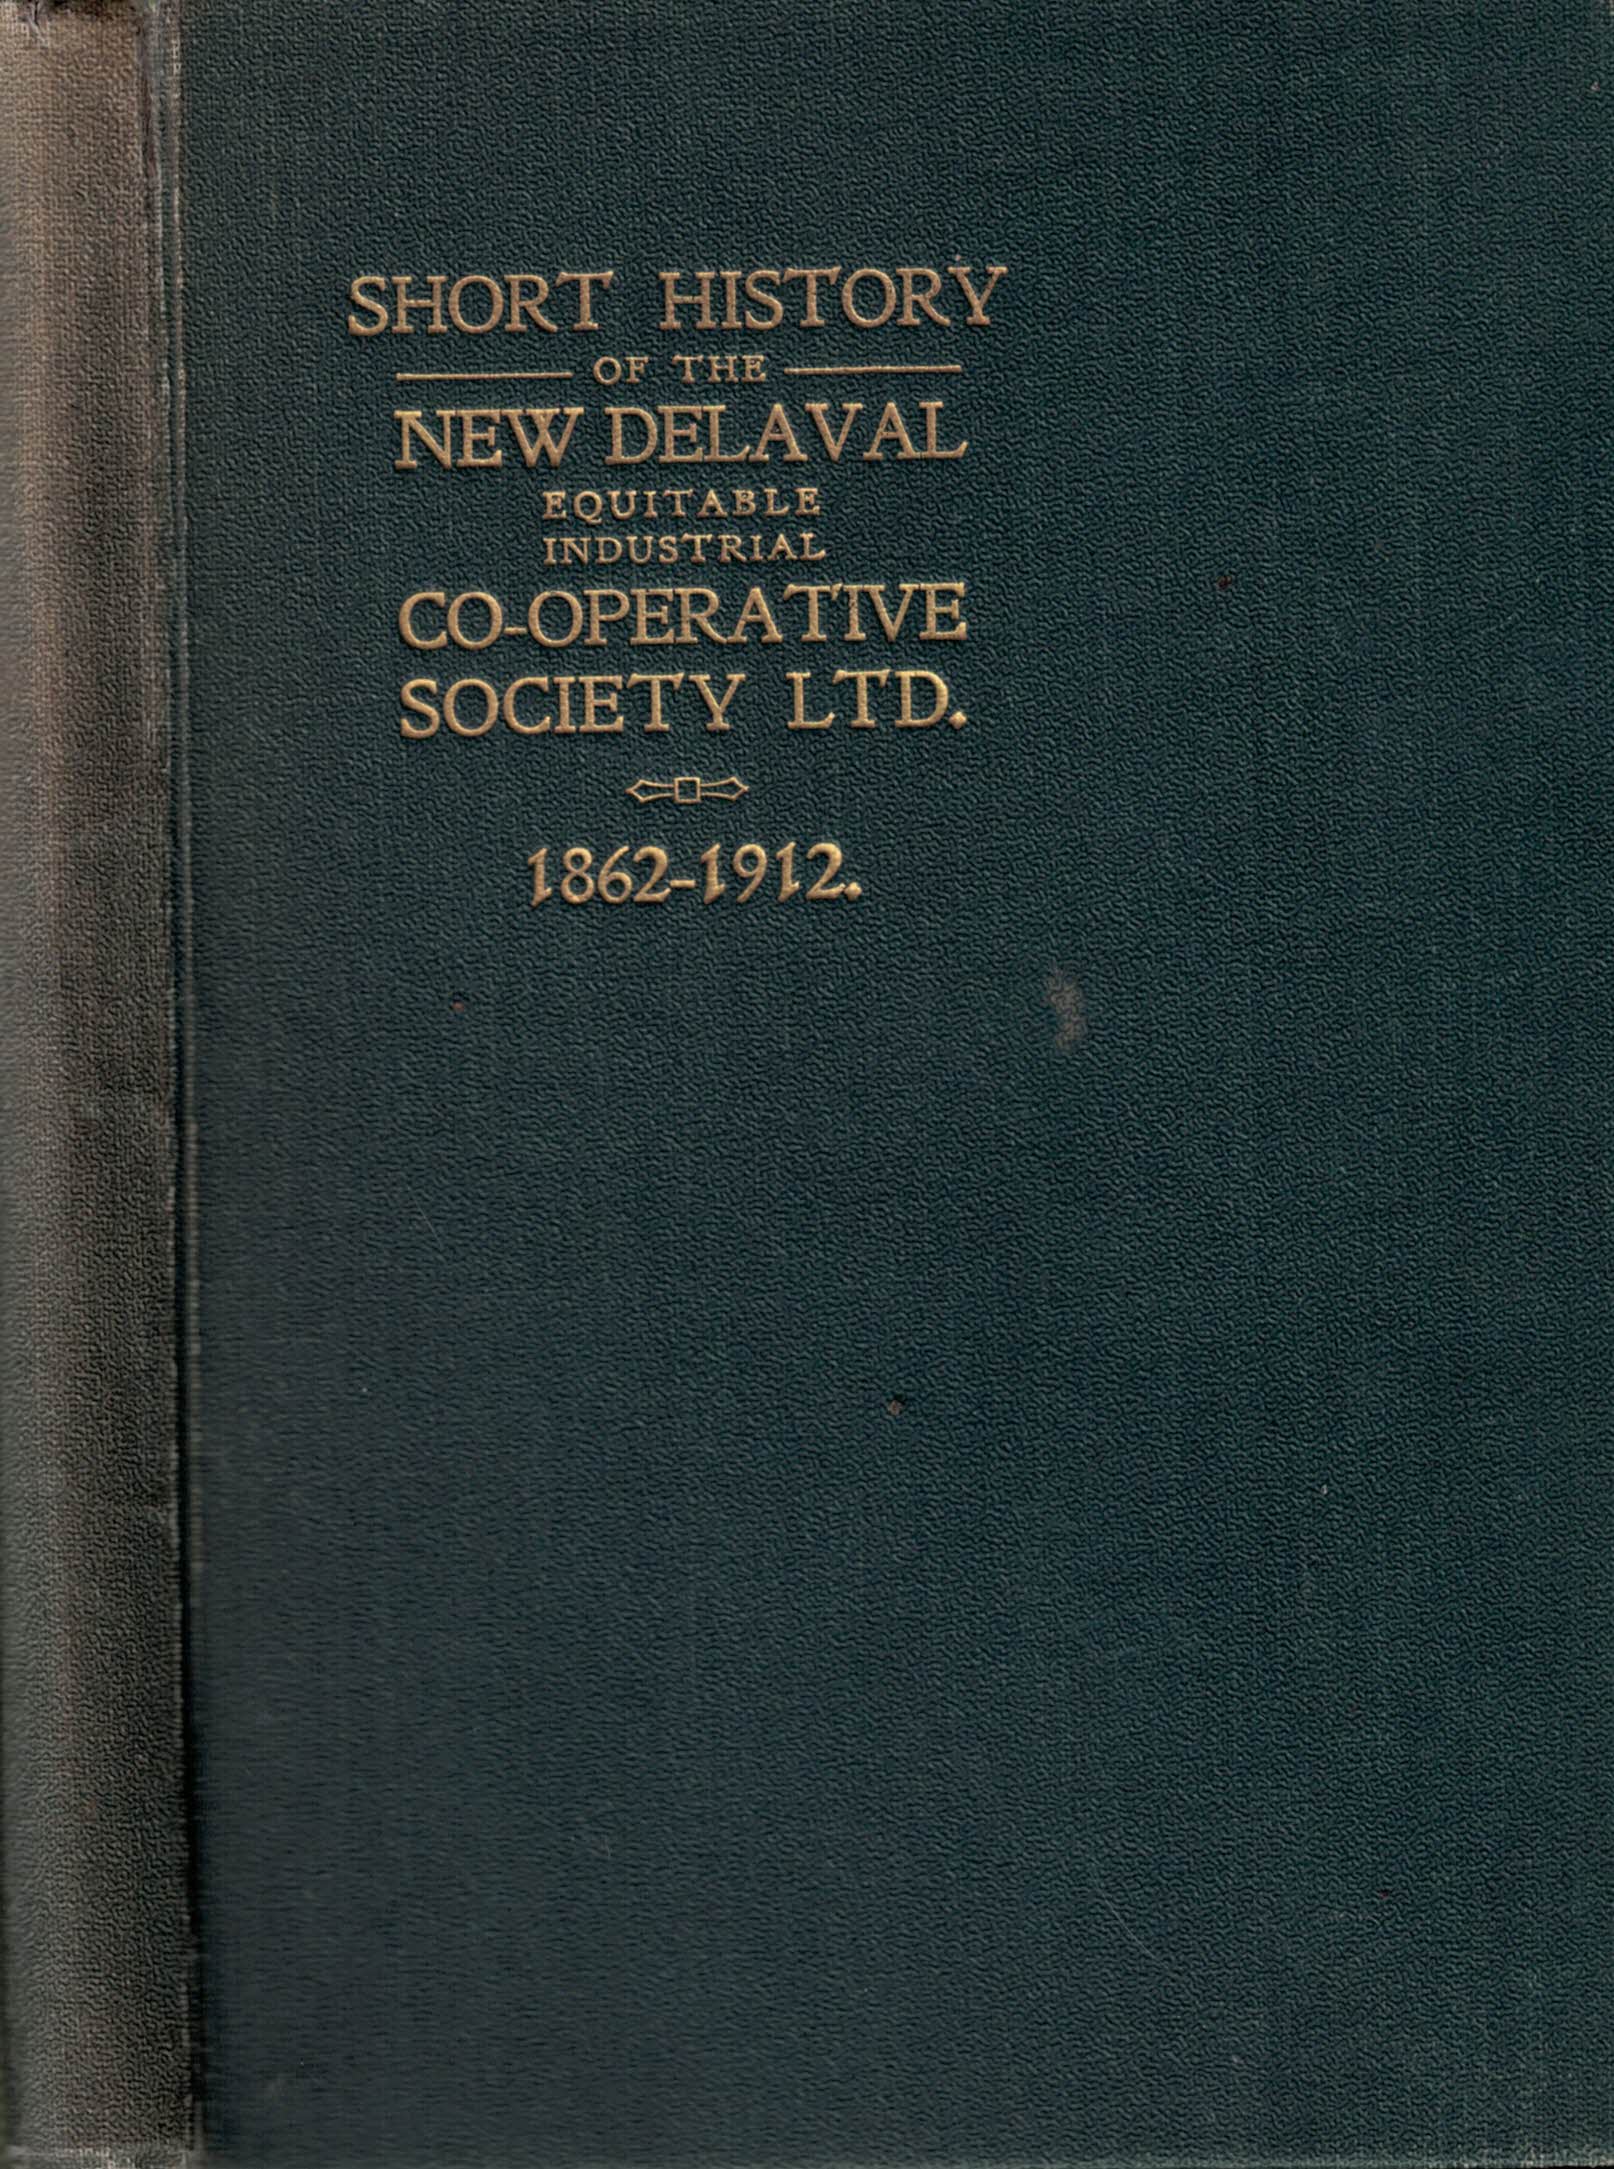 A Short History of the New Delaval Equitable Industrial Co-operative Society Limited. 1862-1912